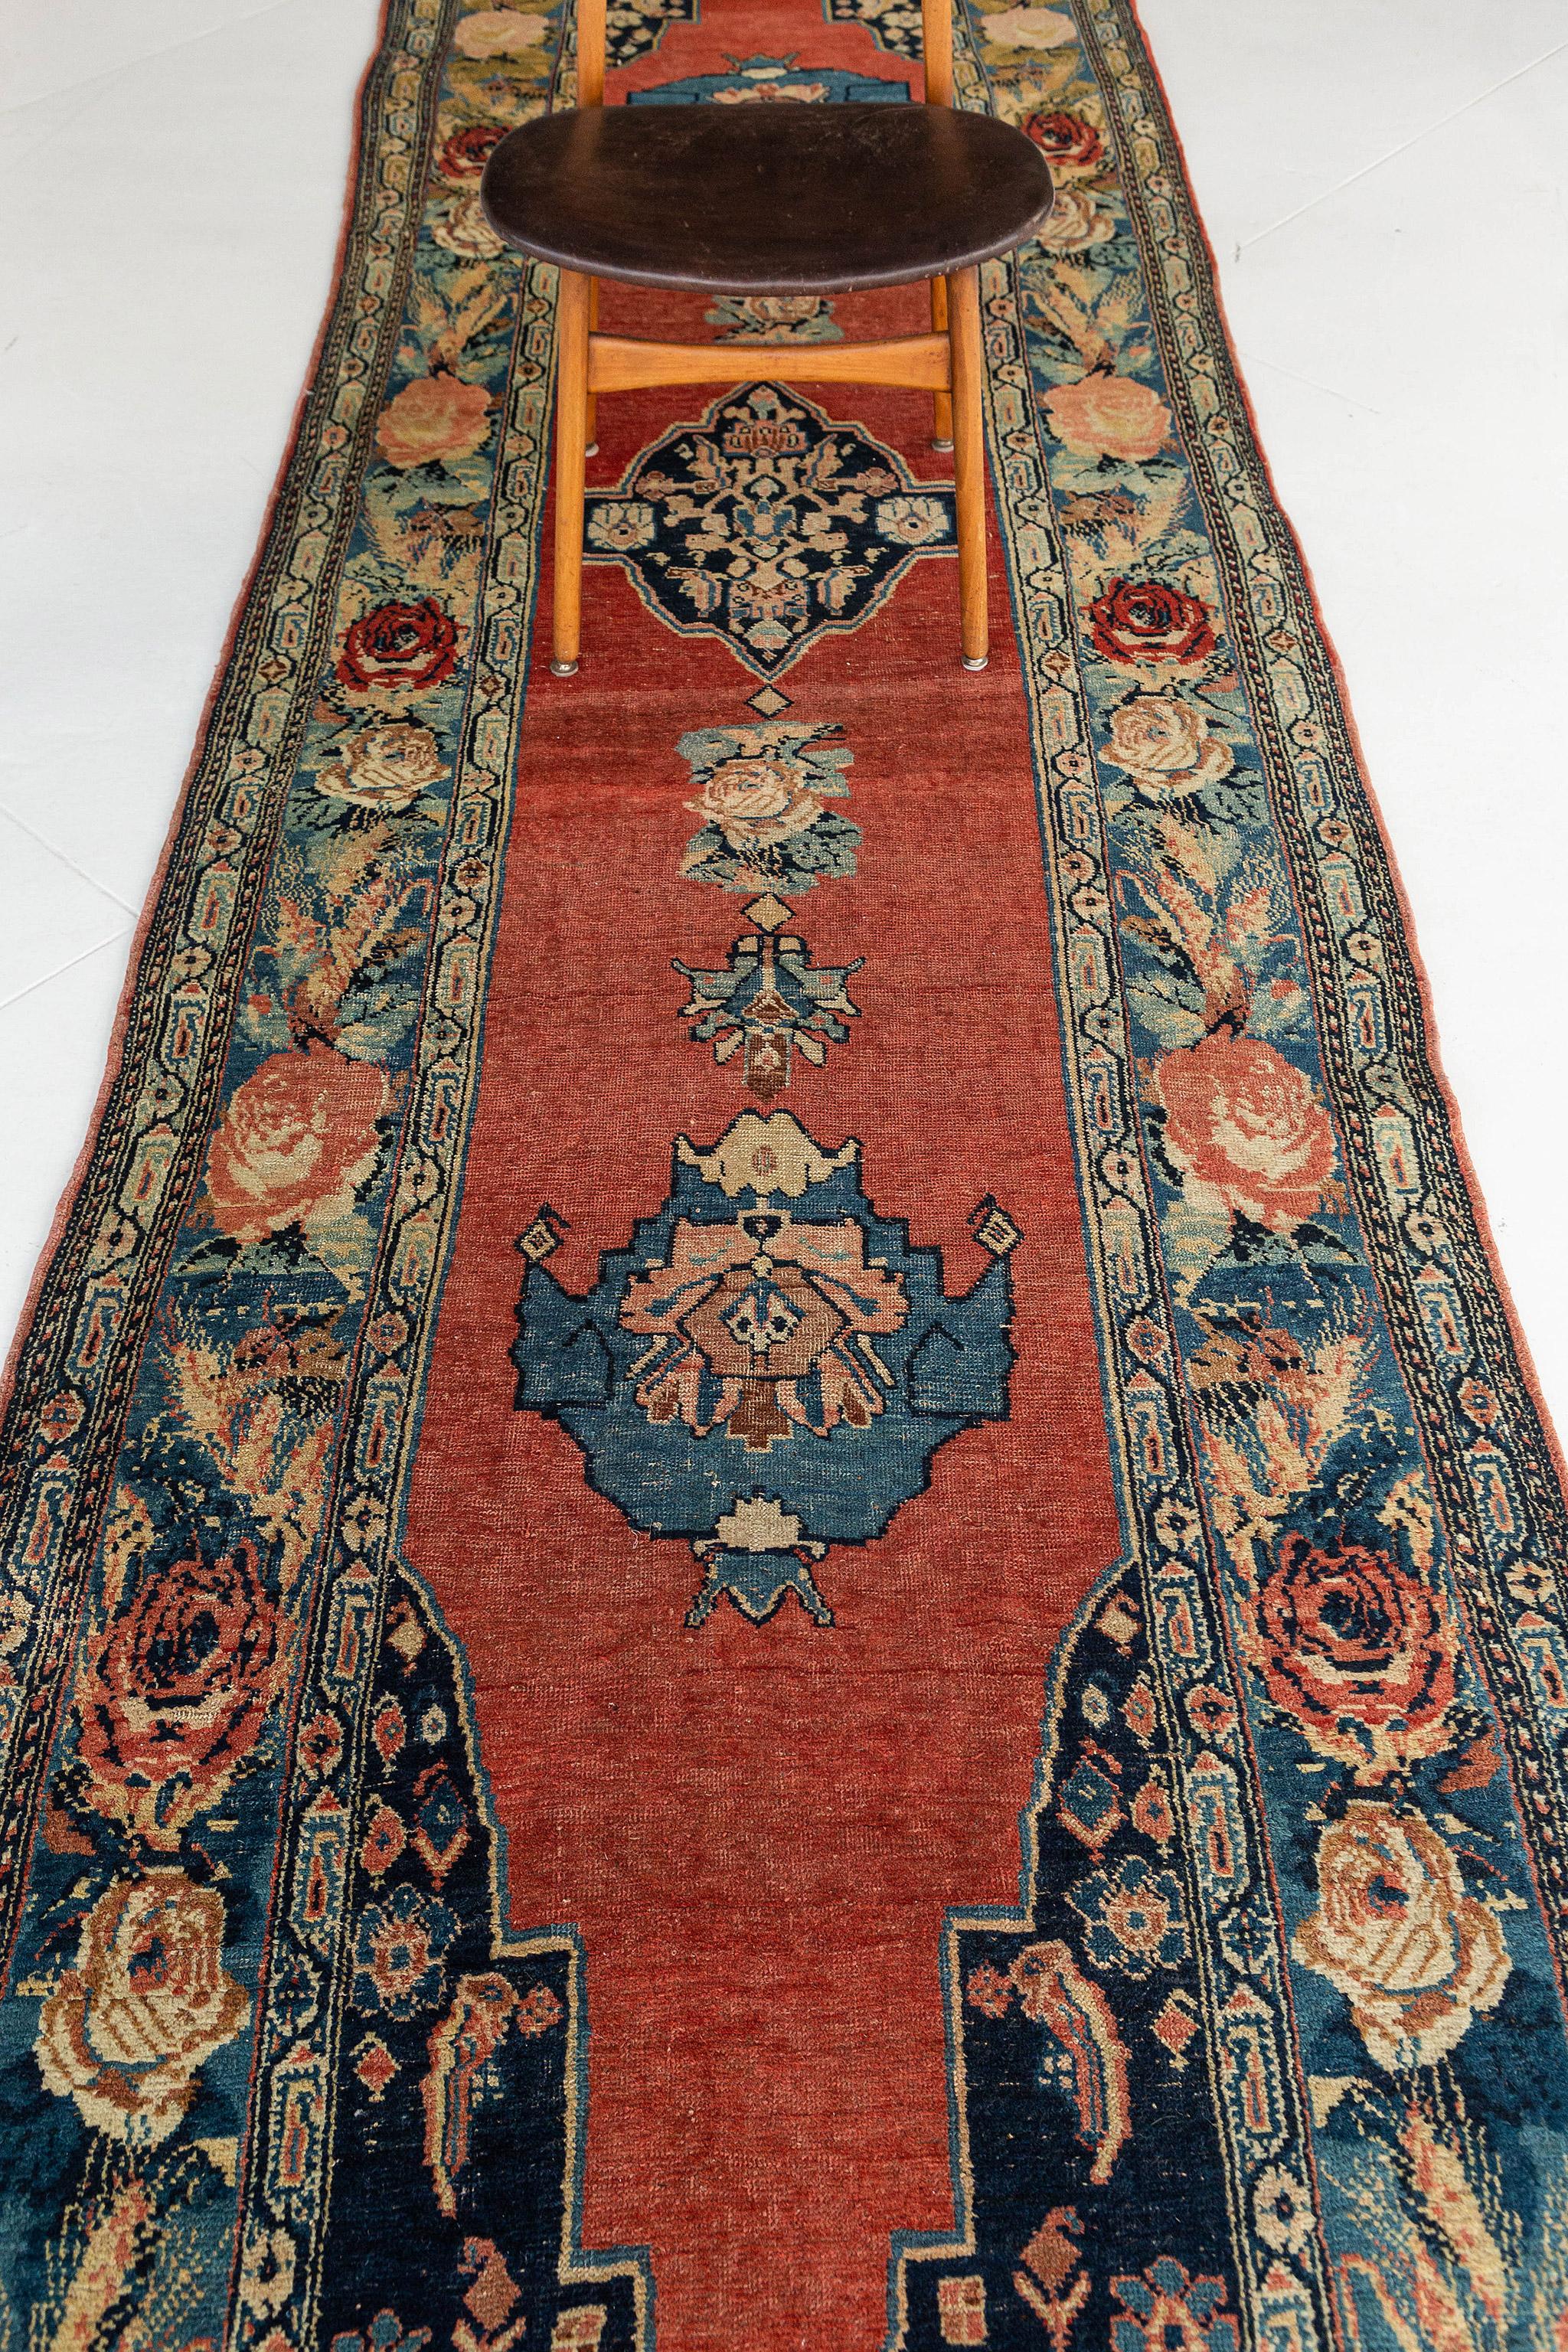 Hailing from Persia or modern-day Iran, this genuine antique Persian Bidjar Runner rug is constructed with beautiful red and blue dyes. Beautifully adorned with three medallions at the center. It is surrounded by gigantic blossoming embellishments